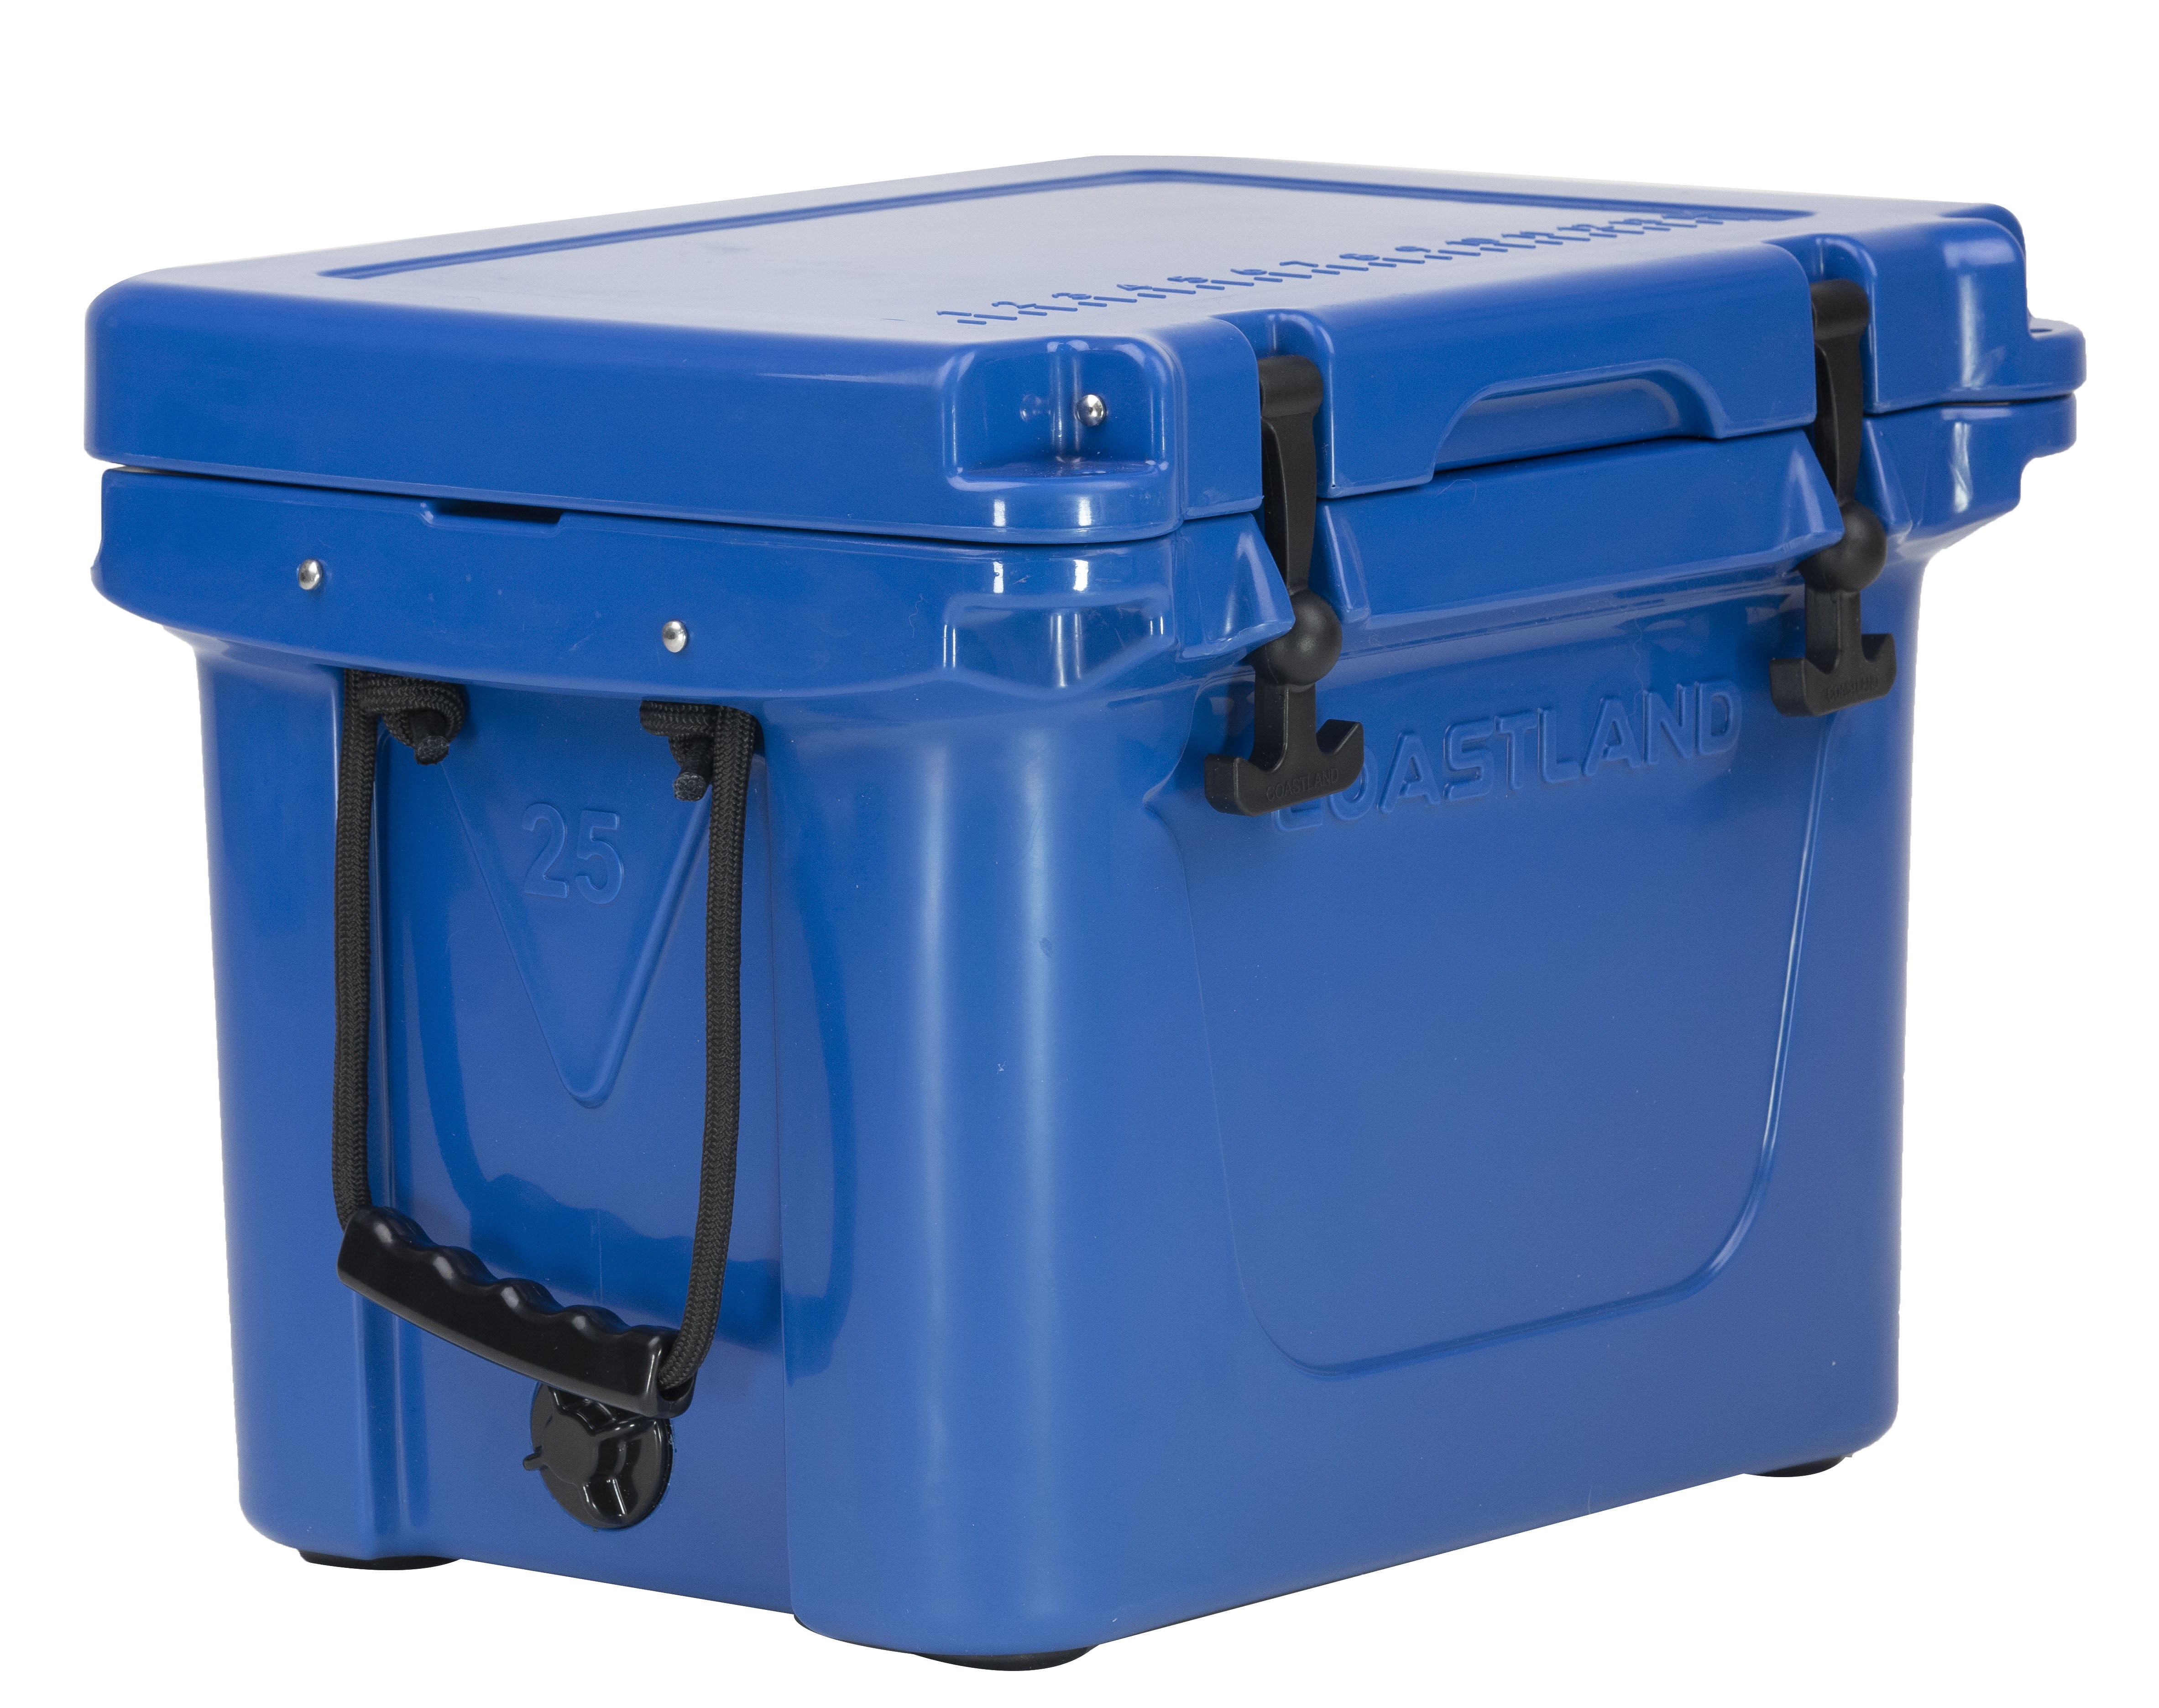 Premium Rotomolded Coolers and Insulated Boxes